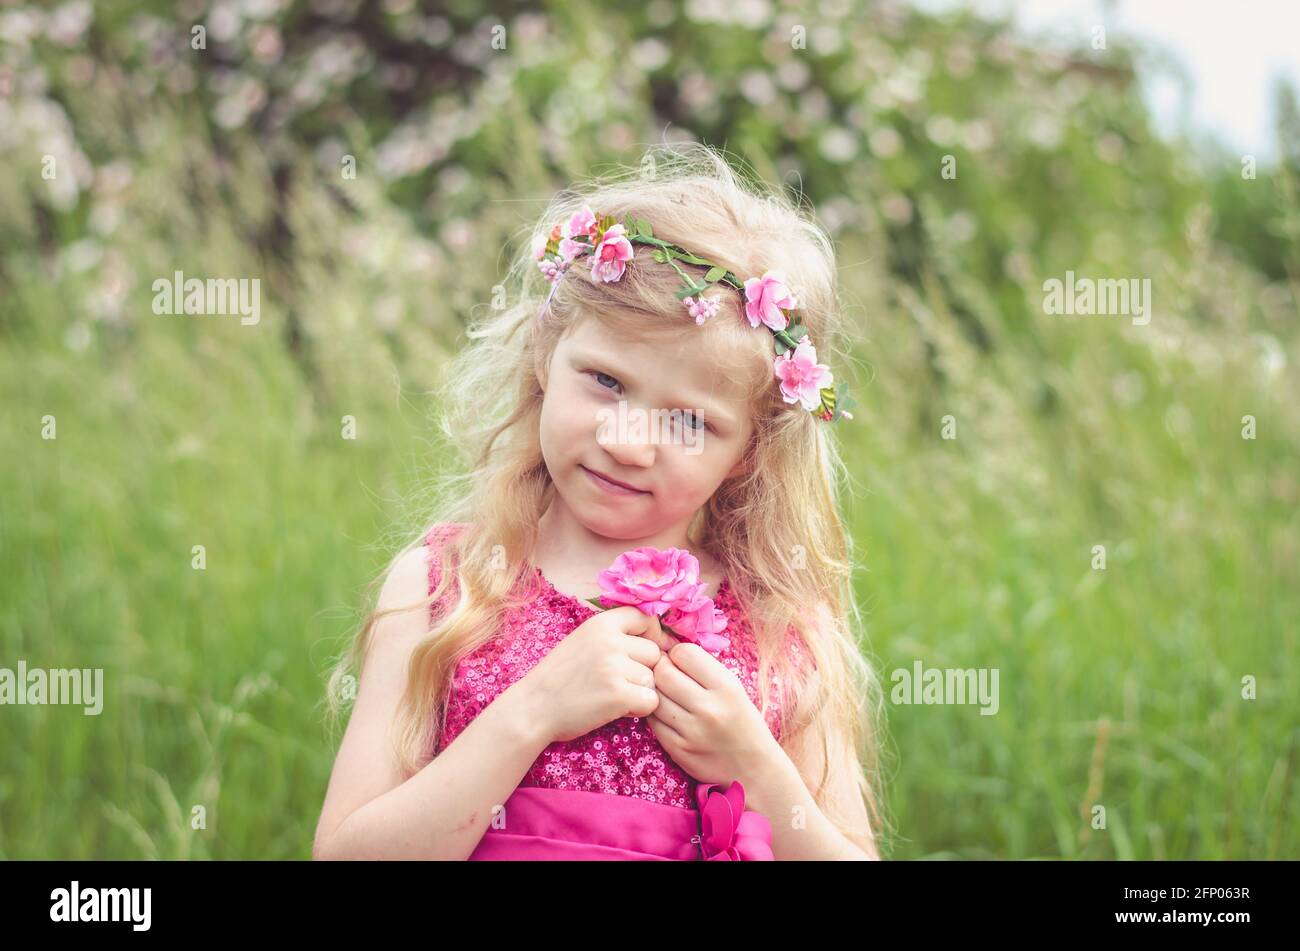 beautiful blond girl in pink dress holding two blossoming pink roses Stock Photo